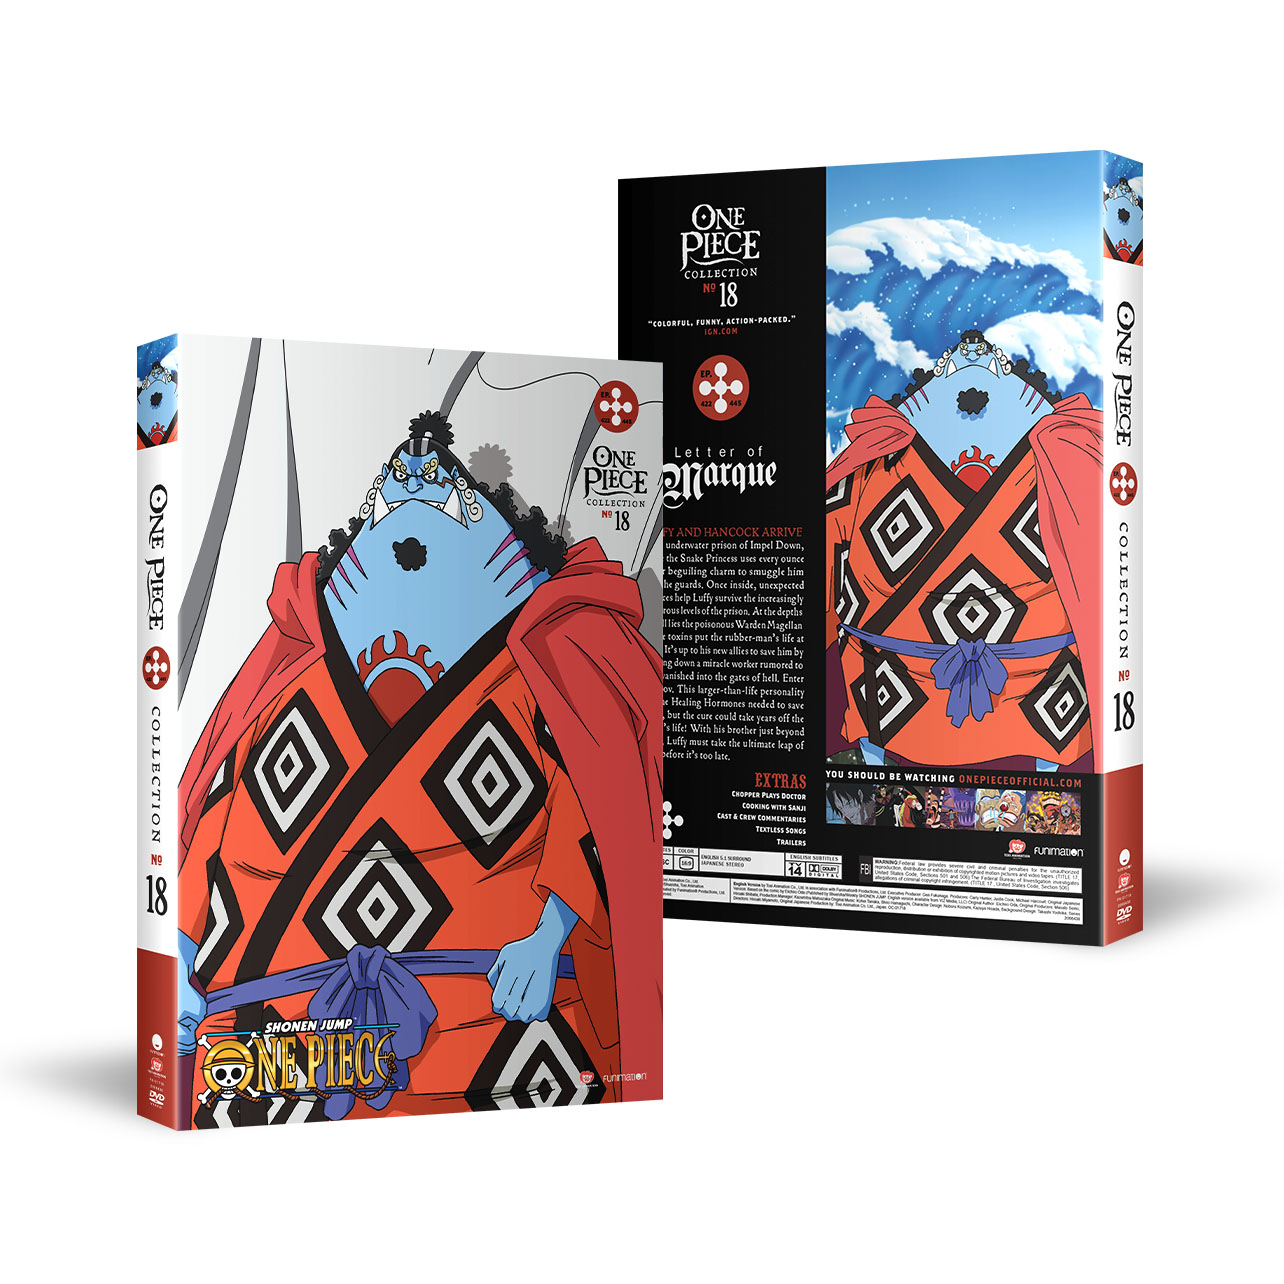 One Piece - Collection 18 - DVD image count 0